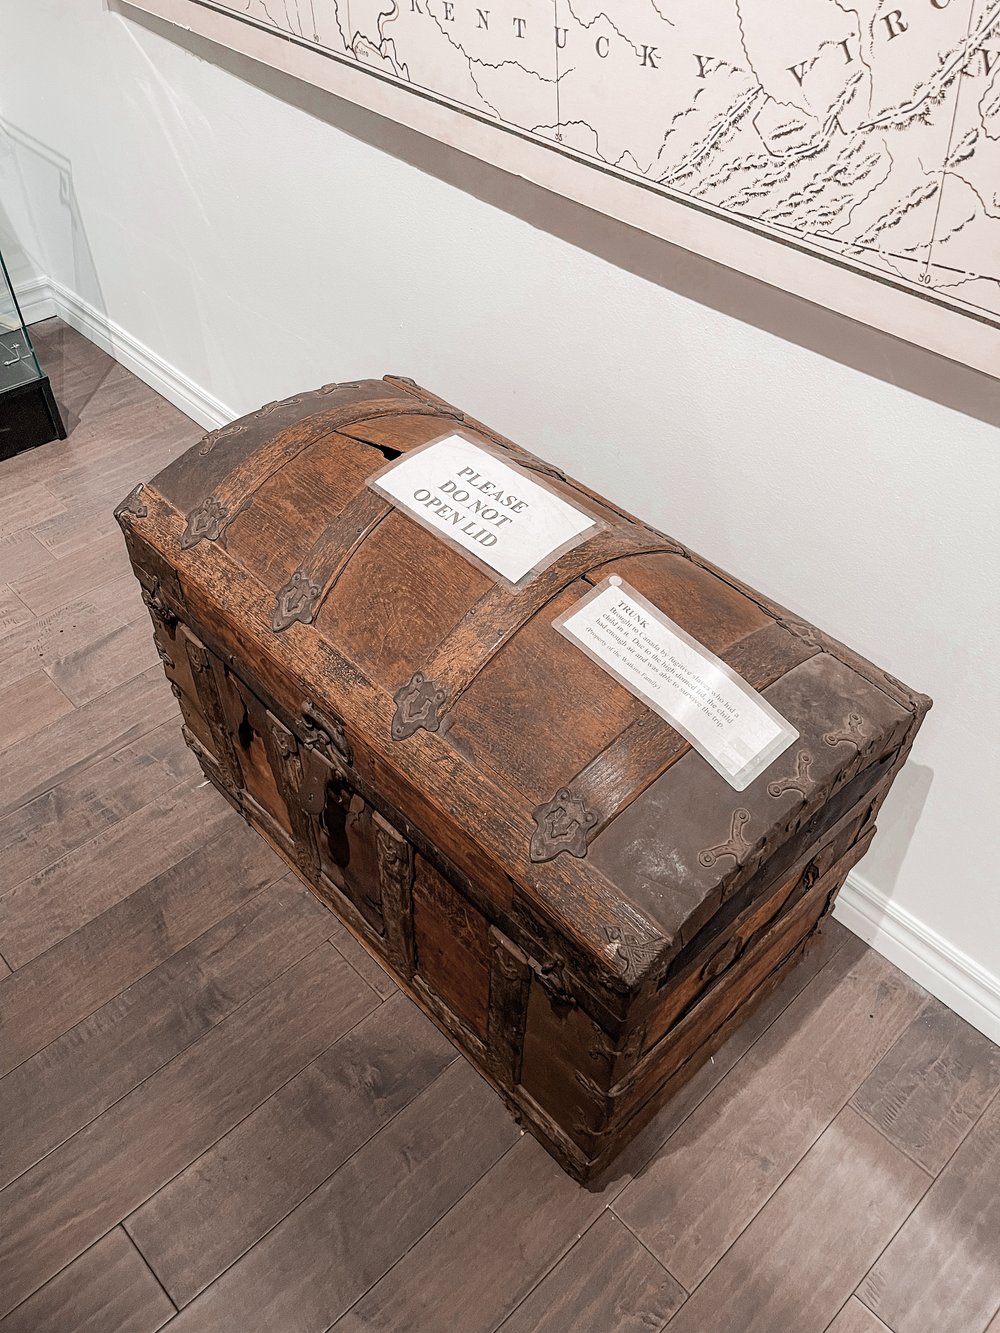  A former slave escaped slavery by hiding in this trunk. 